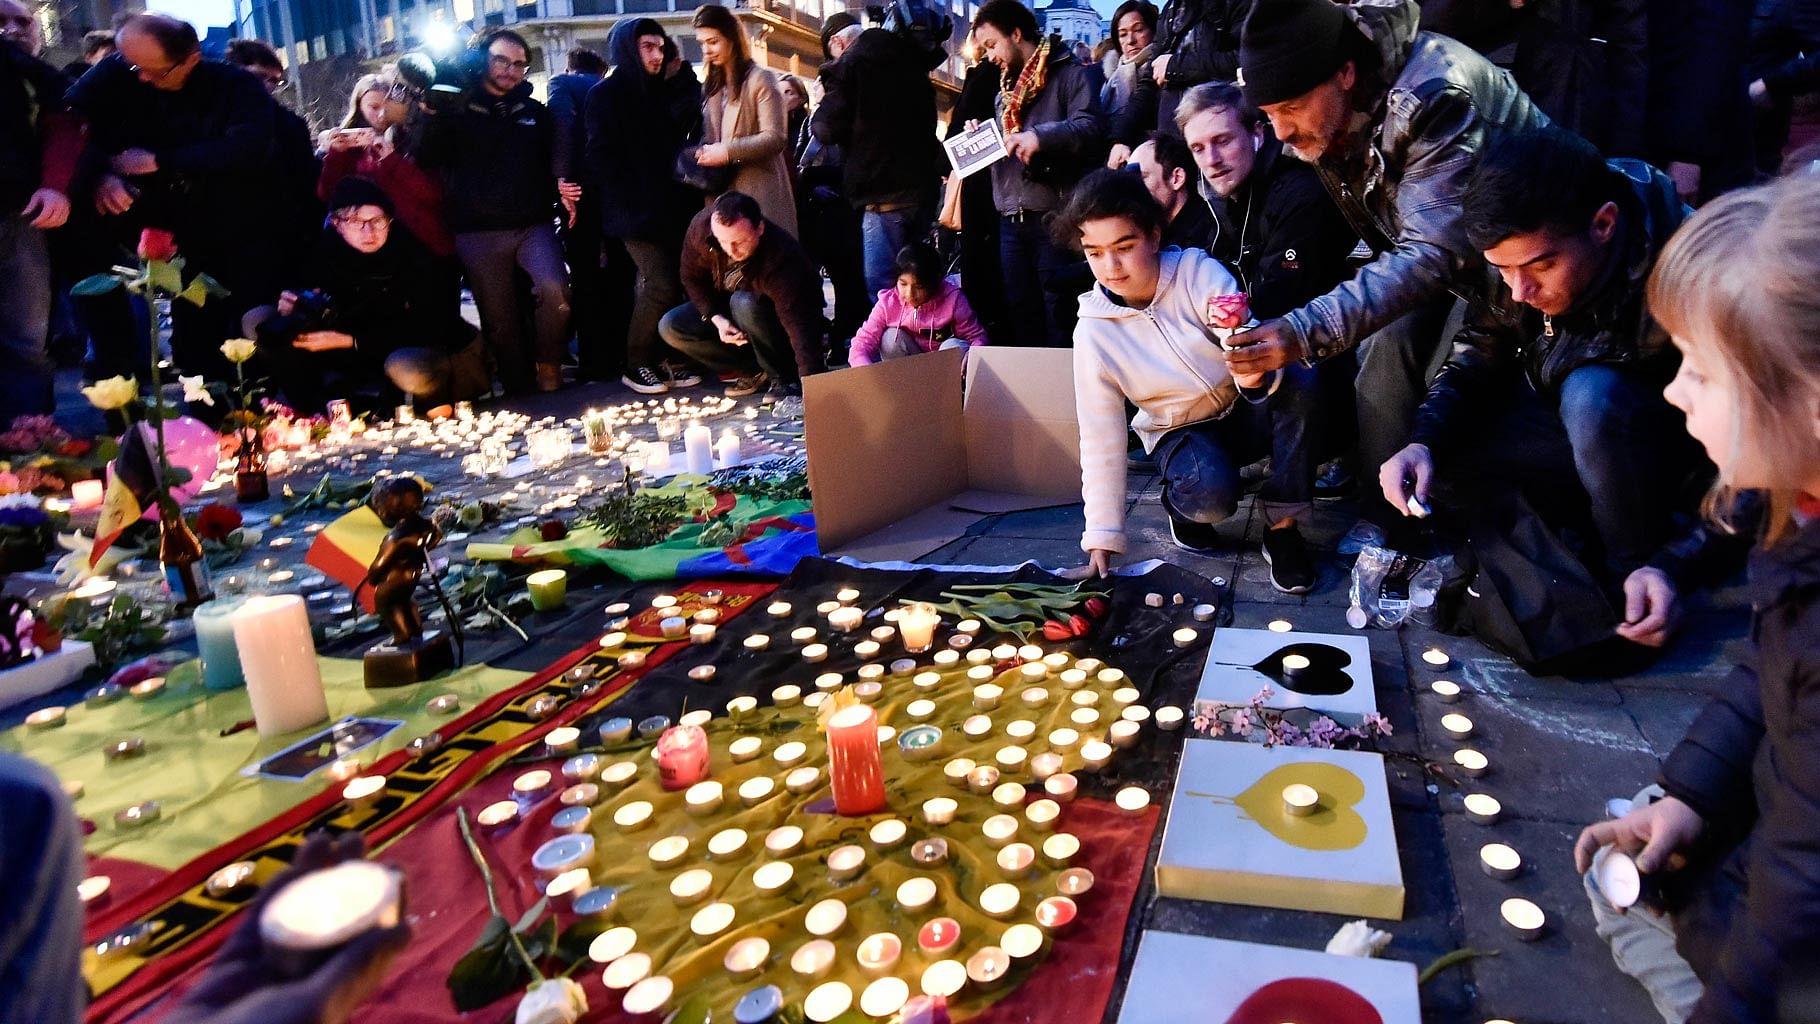 People bring flowers and candles to mourn for the victims at Place de la Bourse in the center of Brussels, Tuesday, March 22, 2016. 